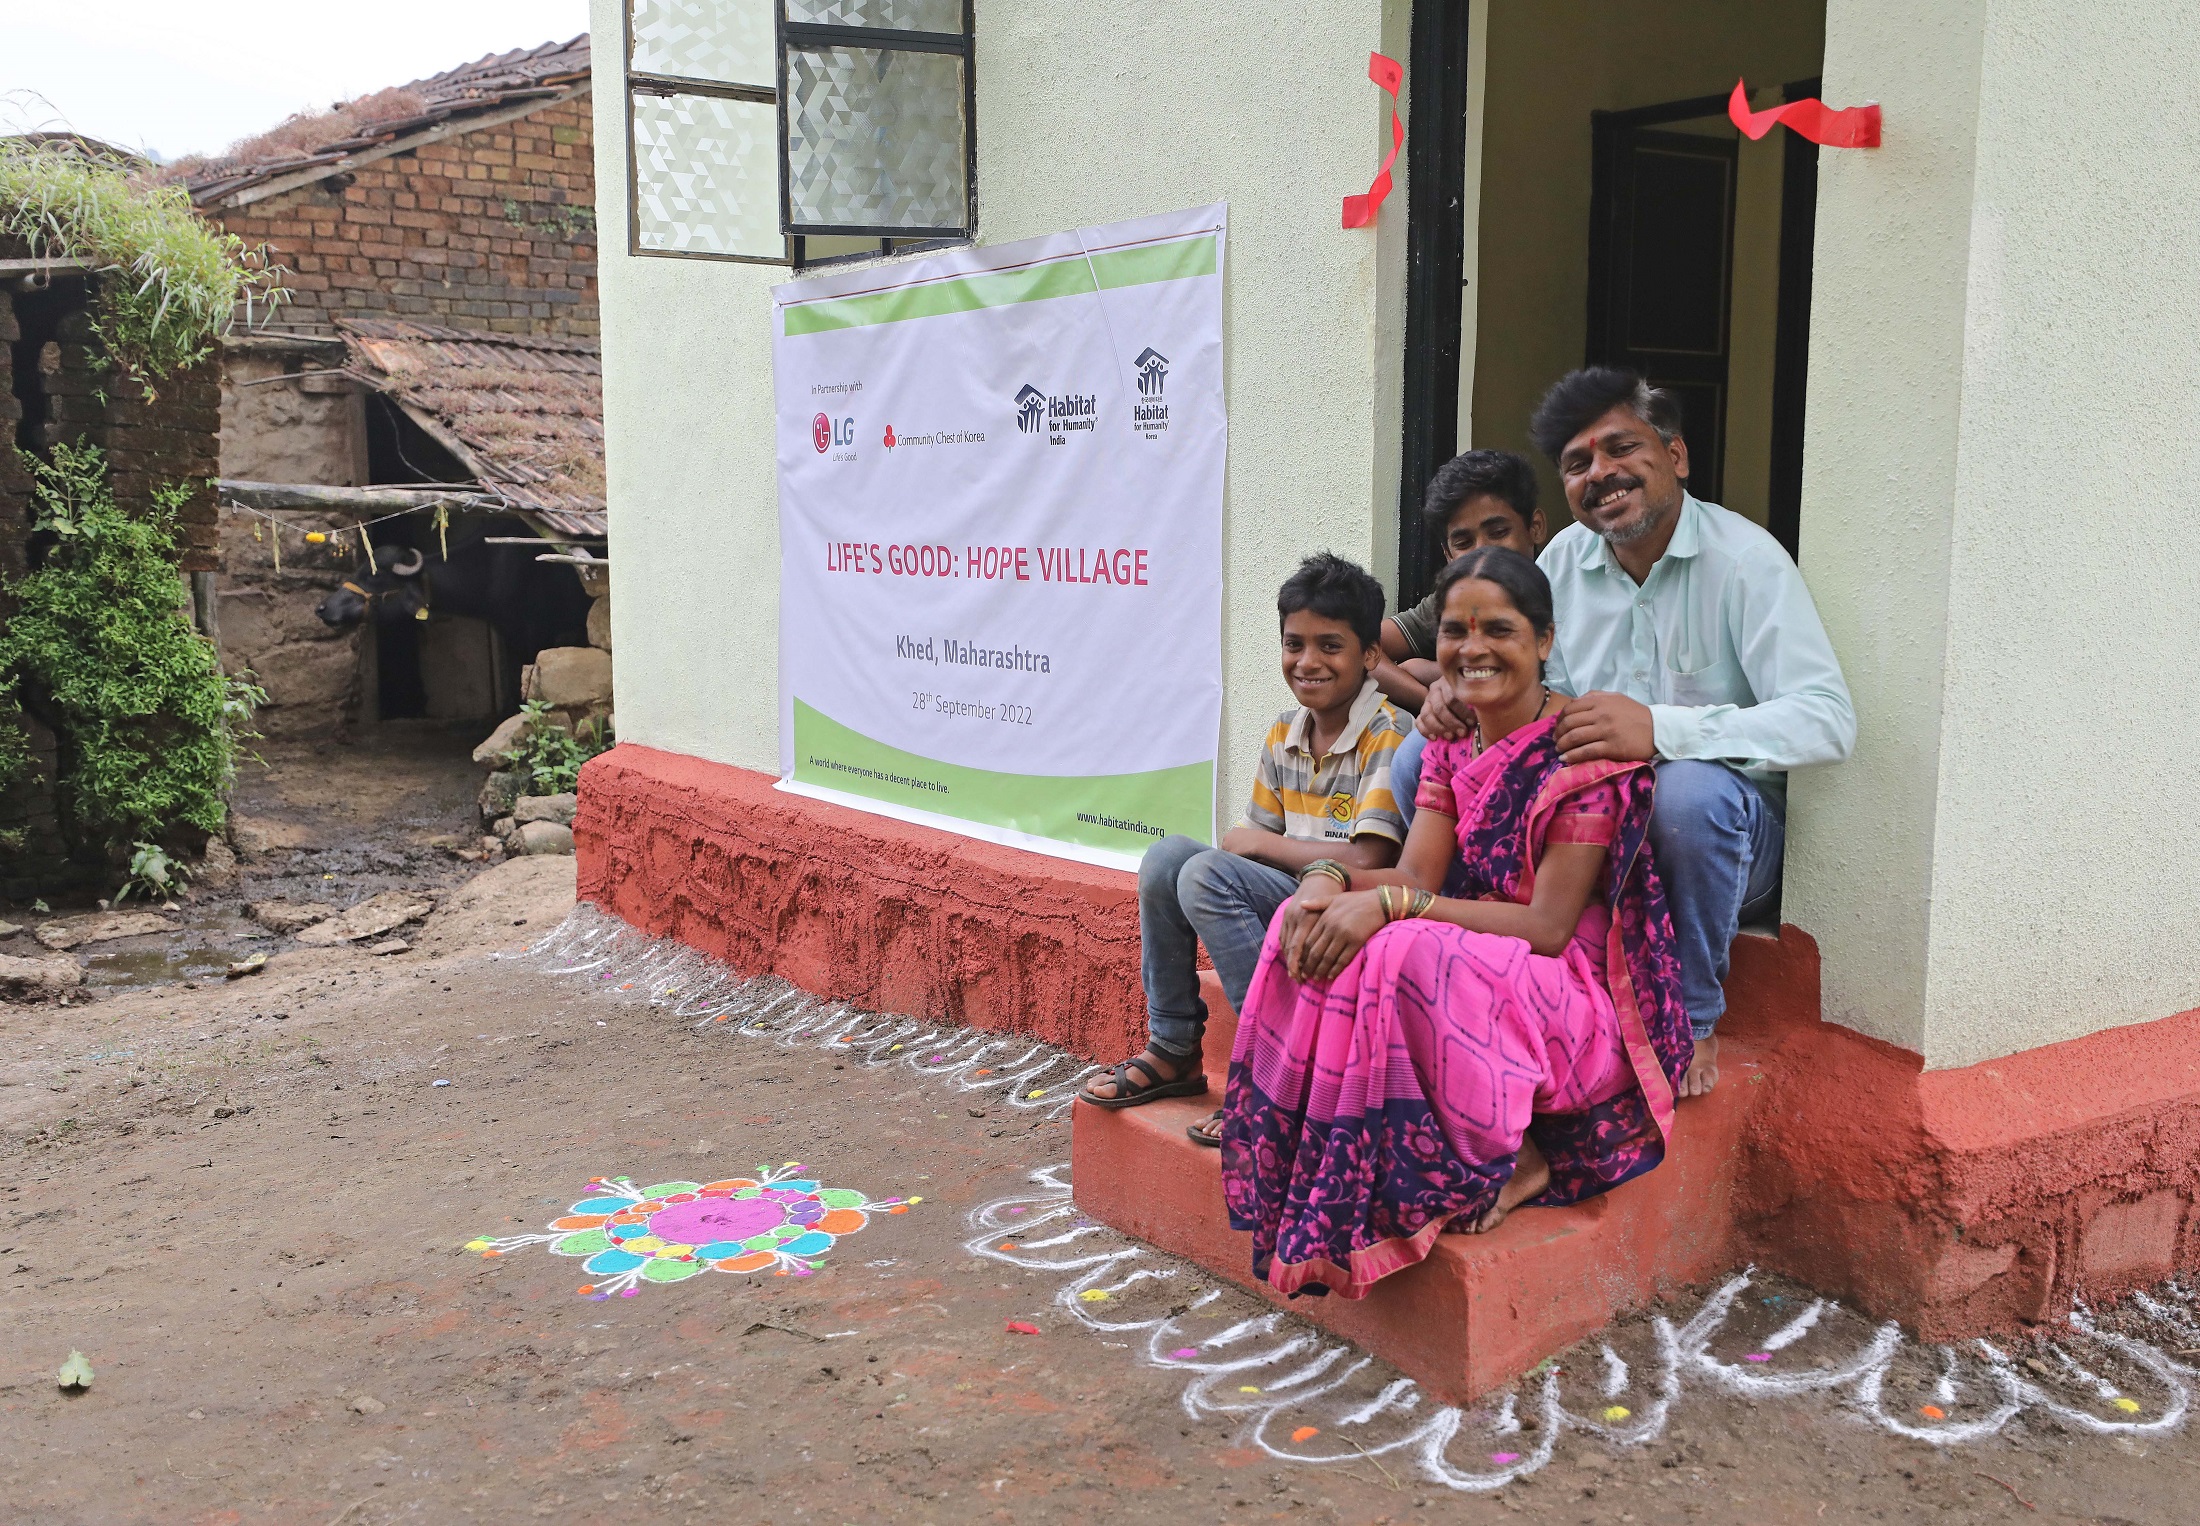 An Indian family posing together at the entrance of their house that was rebuilt through Life's Good: Hope Village project